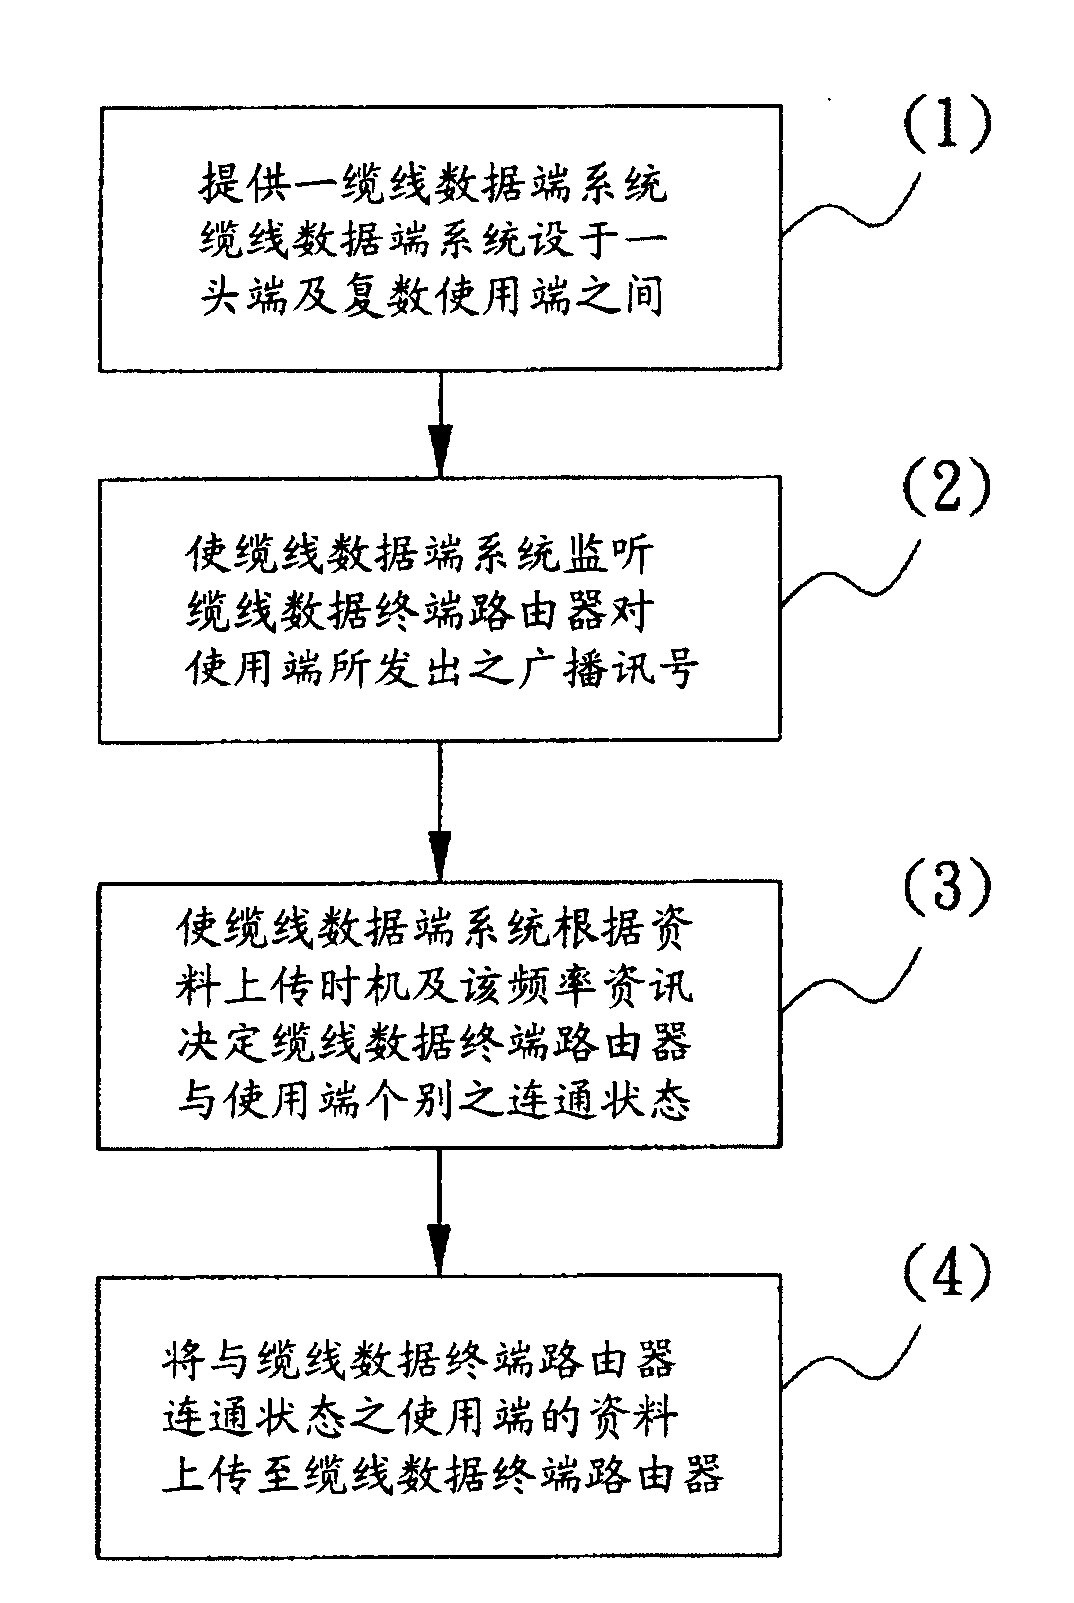 Method for reducing the uplink intrusion noise of cable data system